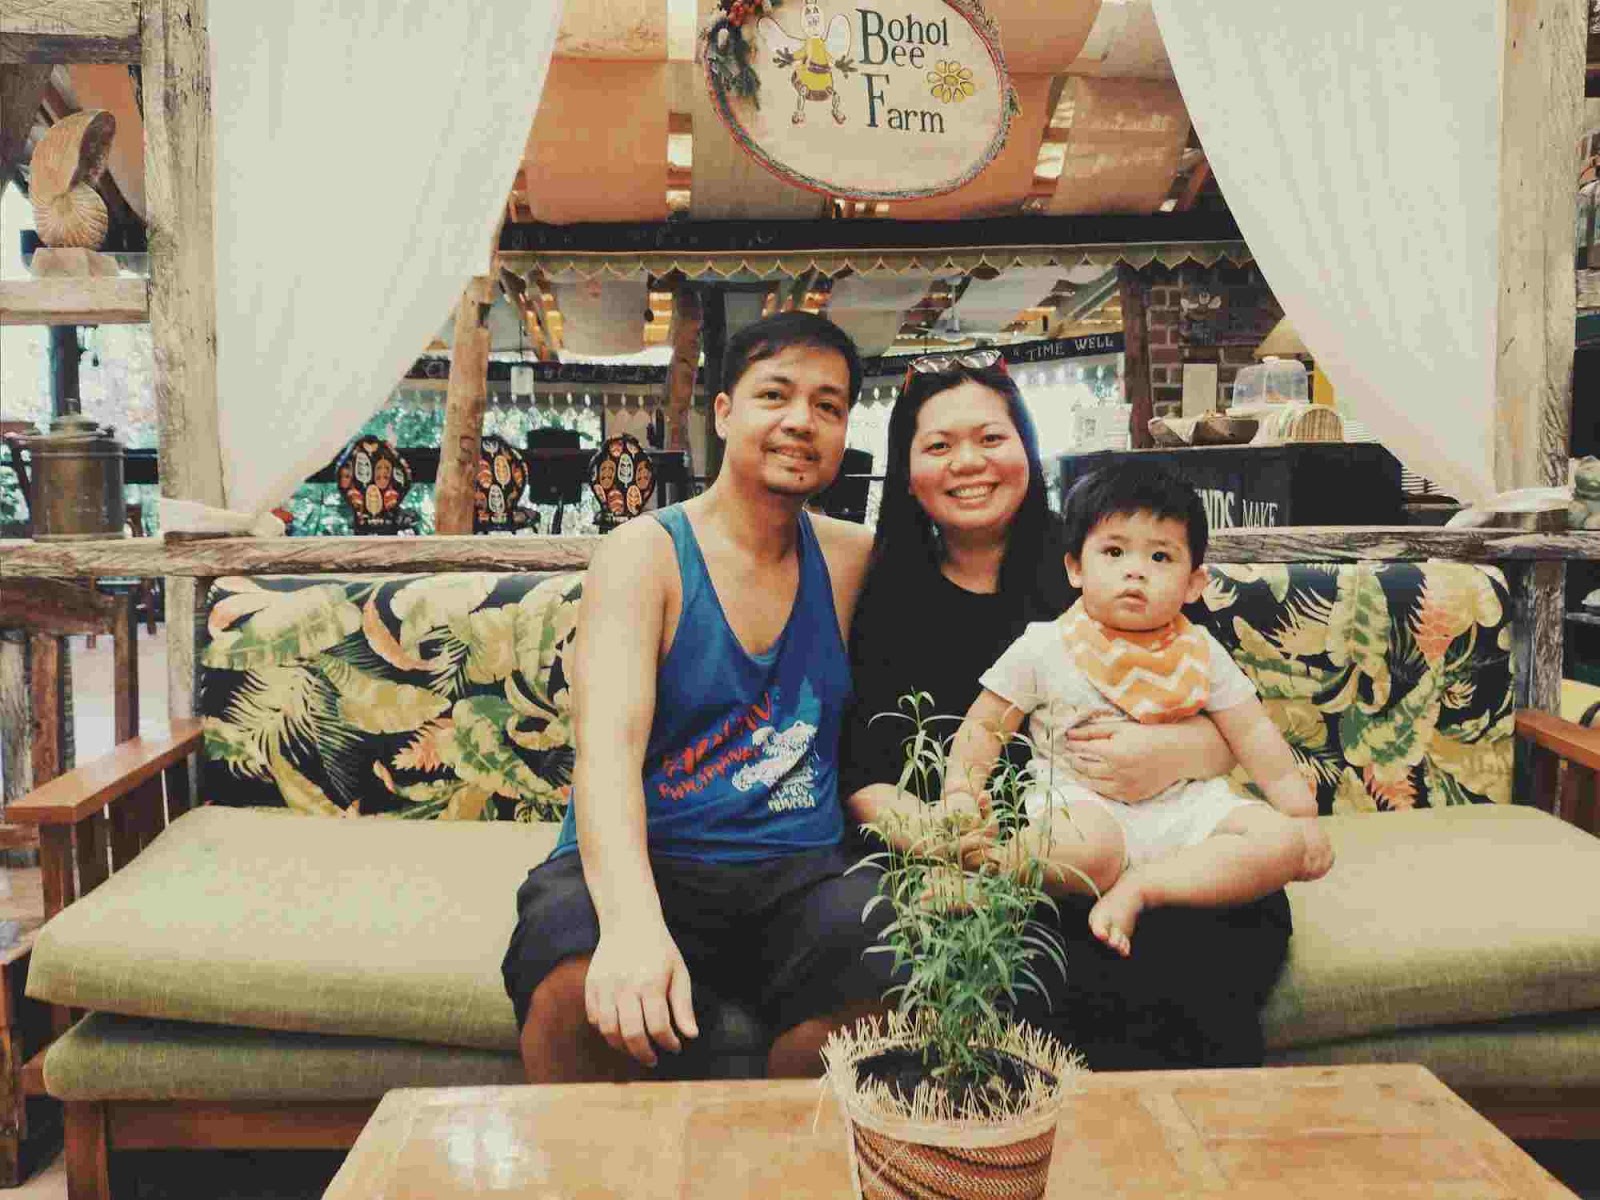 Our family photo at the Bohol Bee Farm